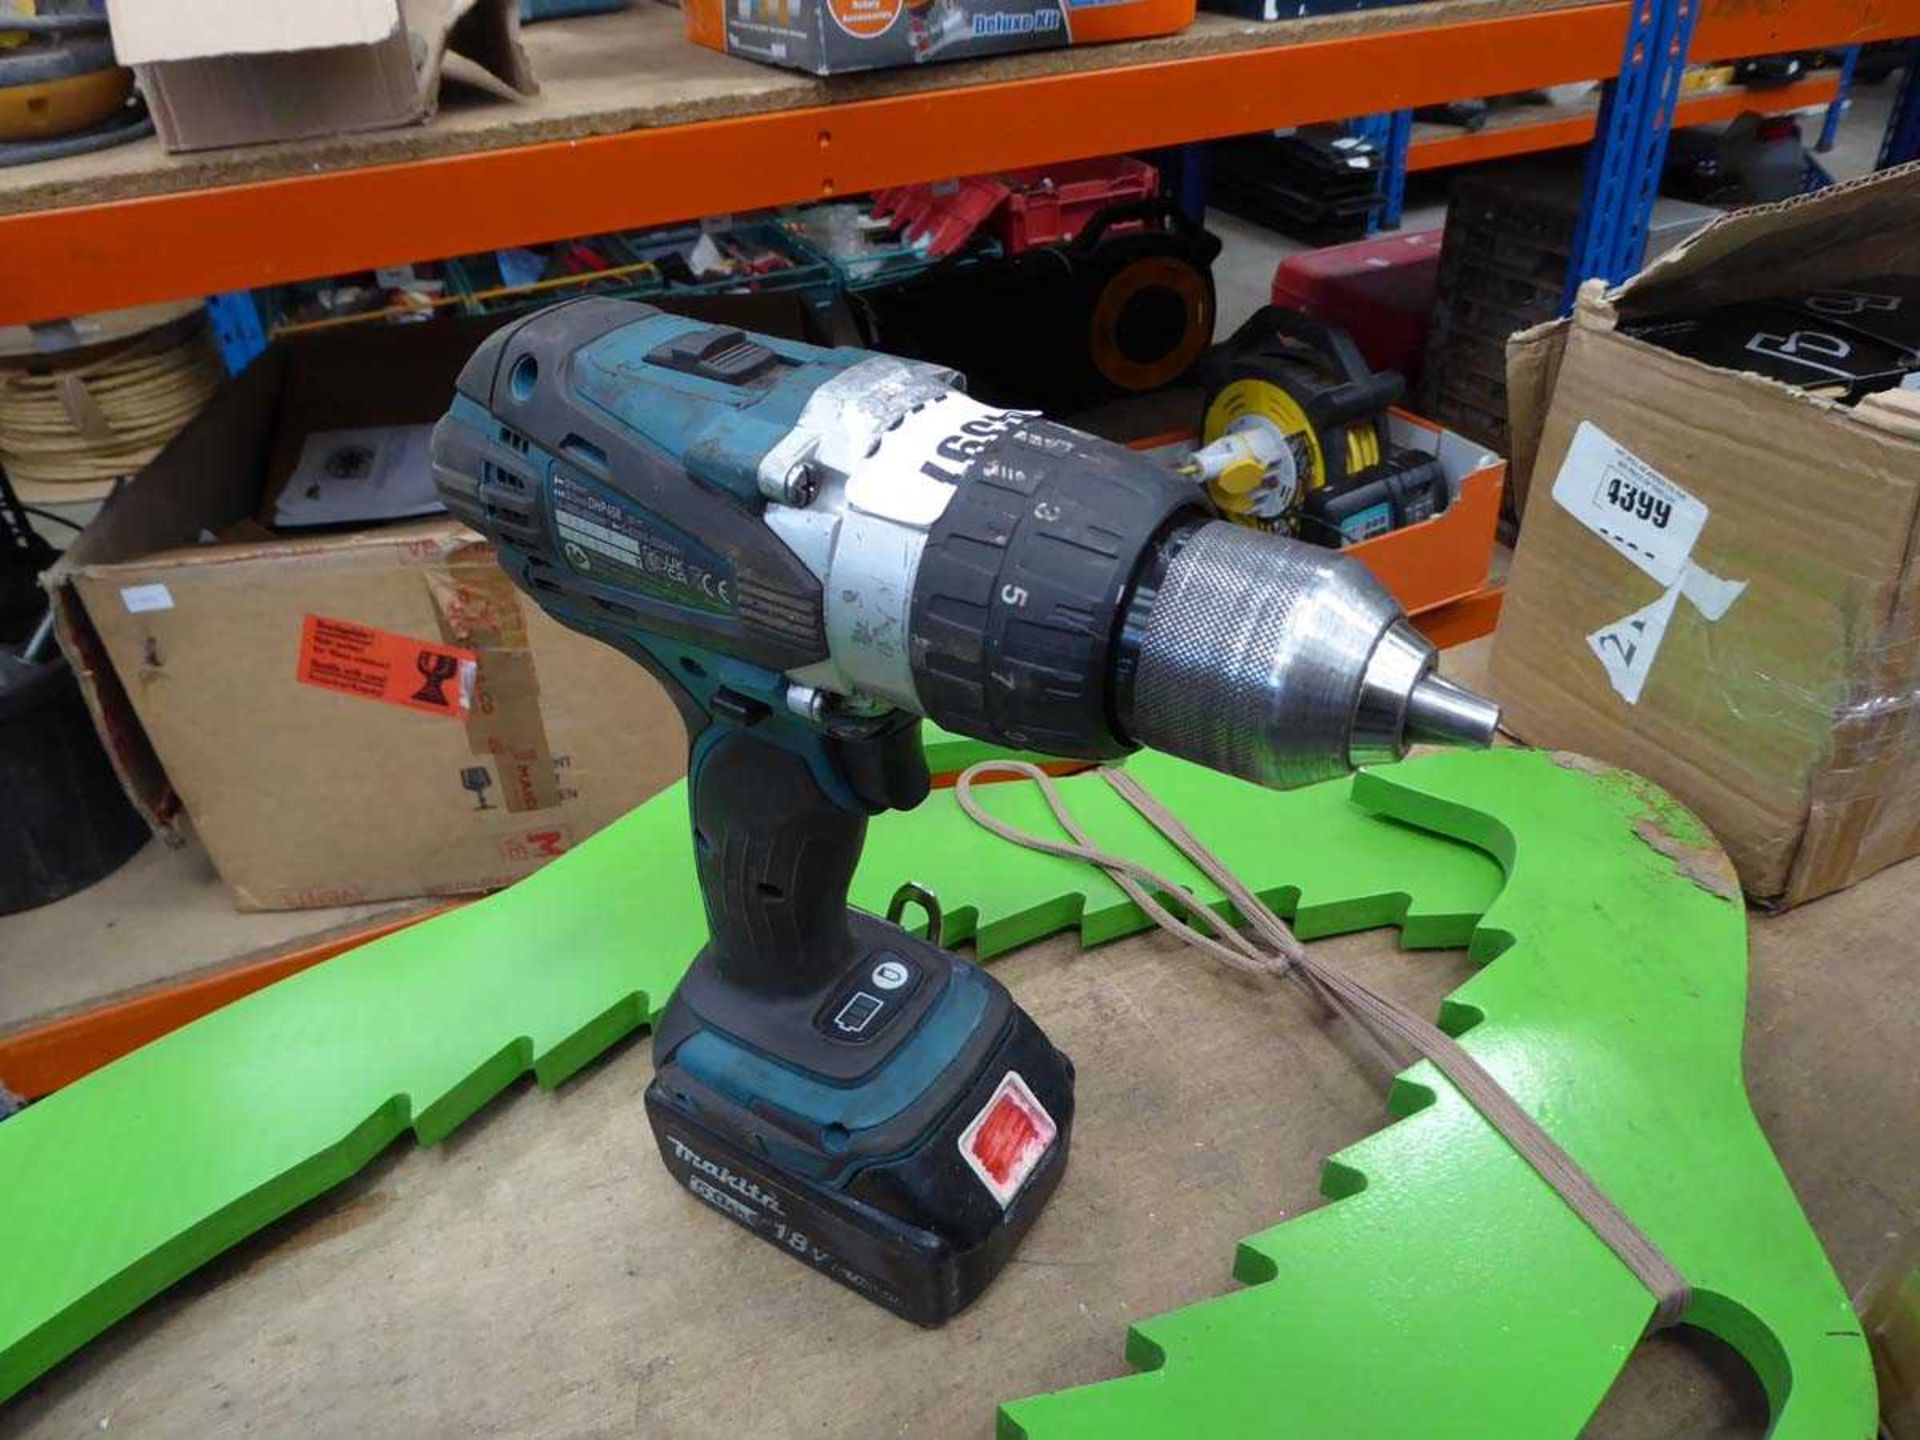 Makita battery drill, one battery, no charger